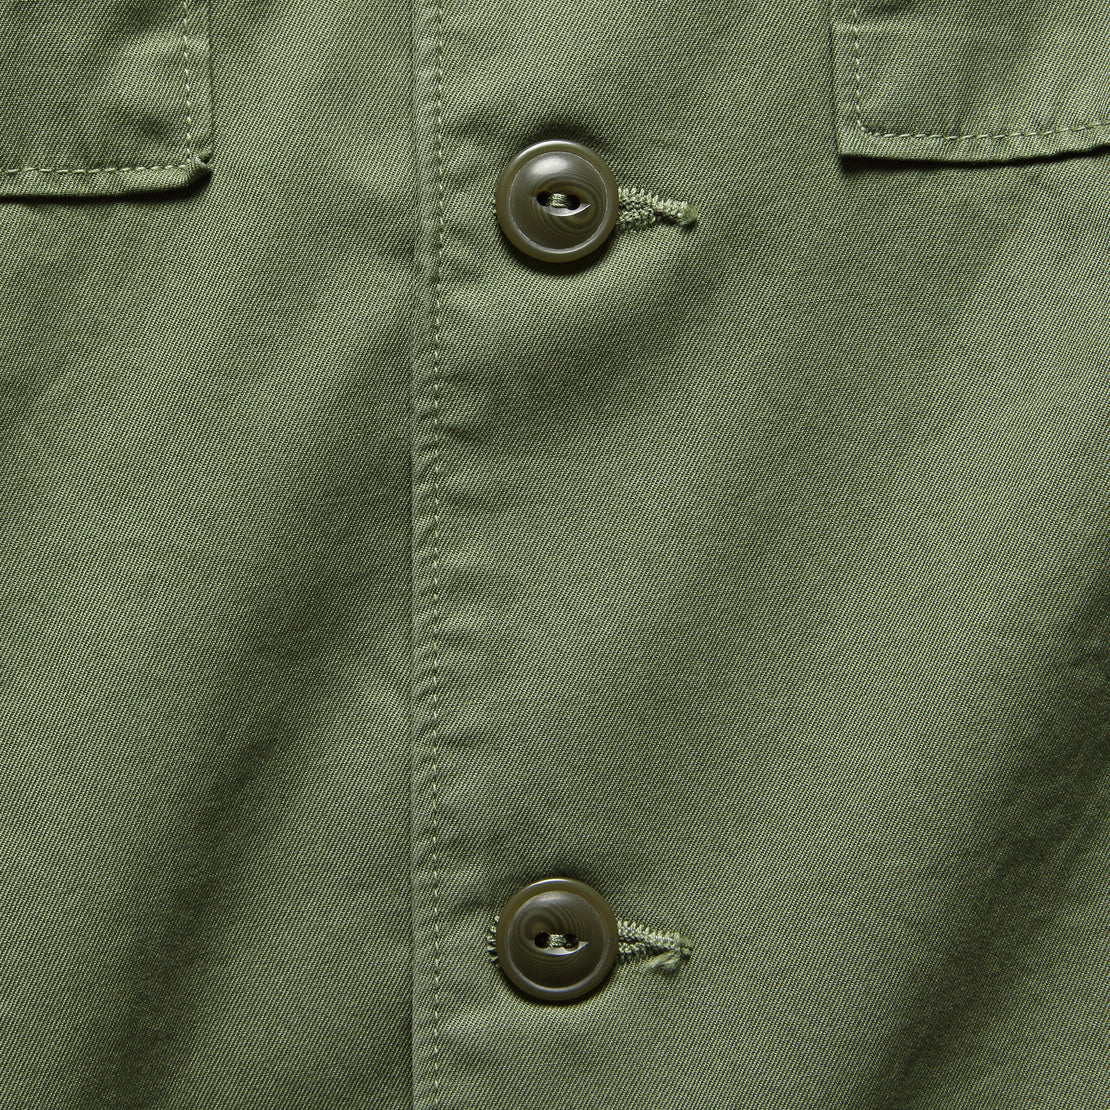 Twill Fatigue Overshirt - Olive Drab - Save Khaki - STAG Provisions - Tops - L/S Woven - Overshirt